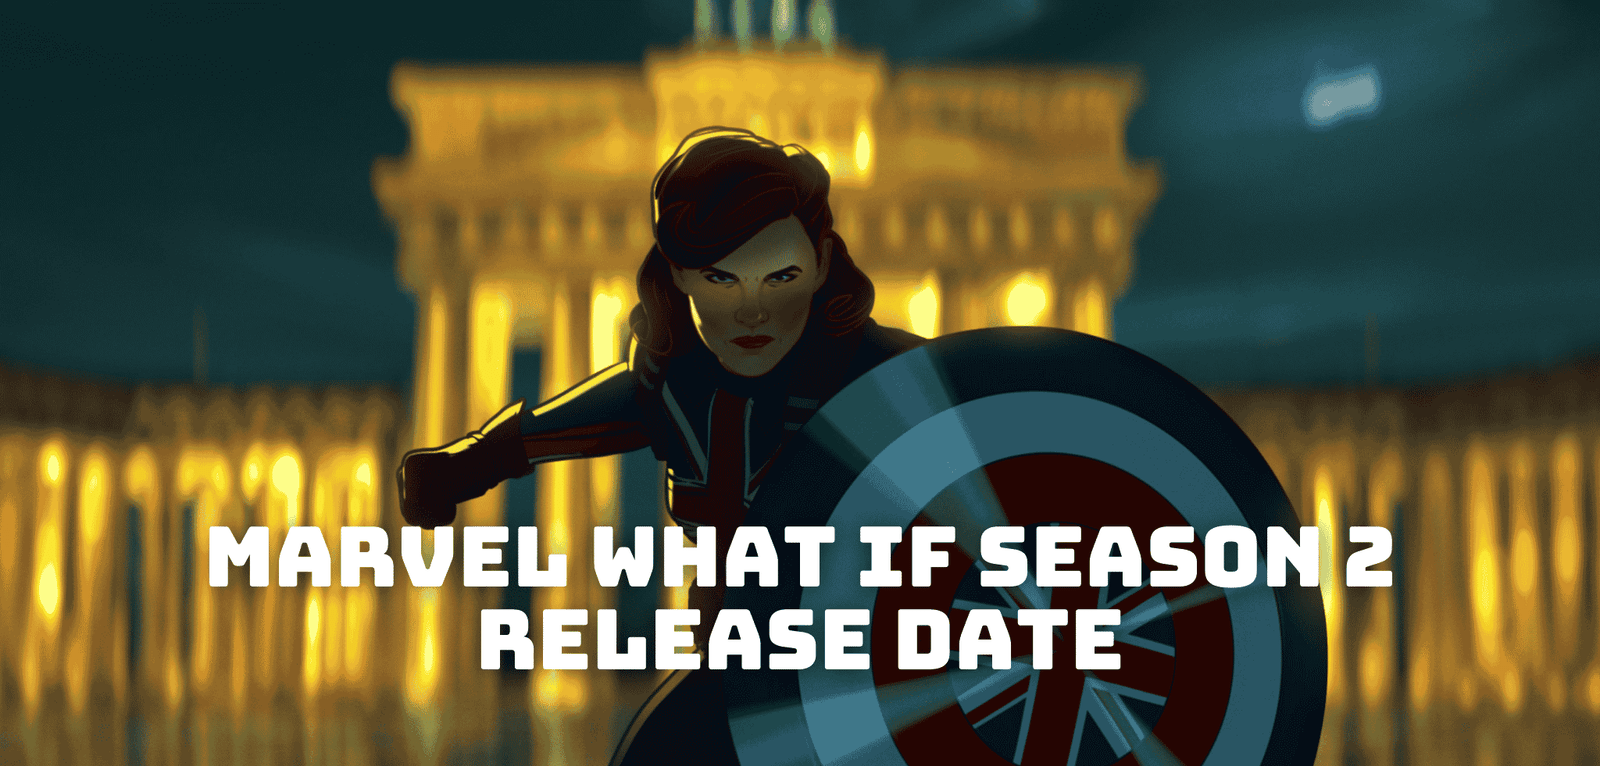 Marvel What If Season 2 Release Date, Trailer